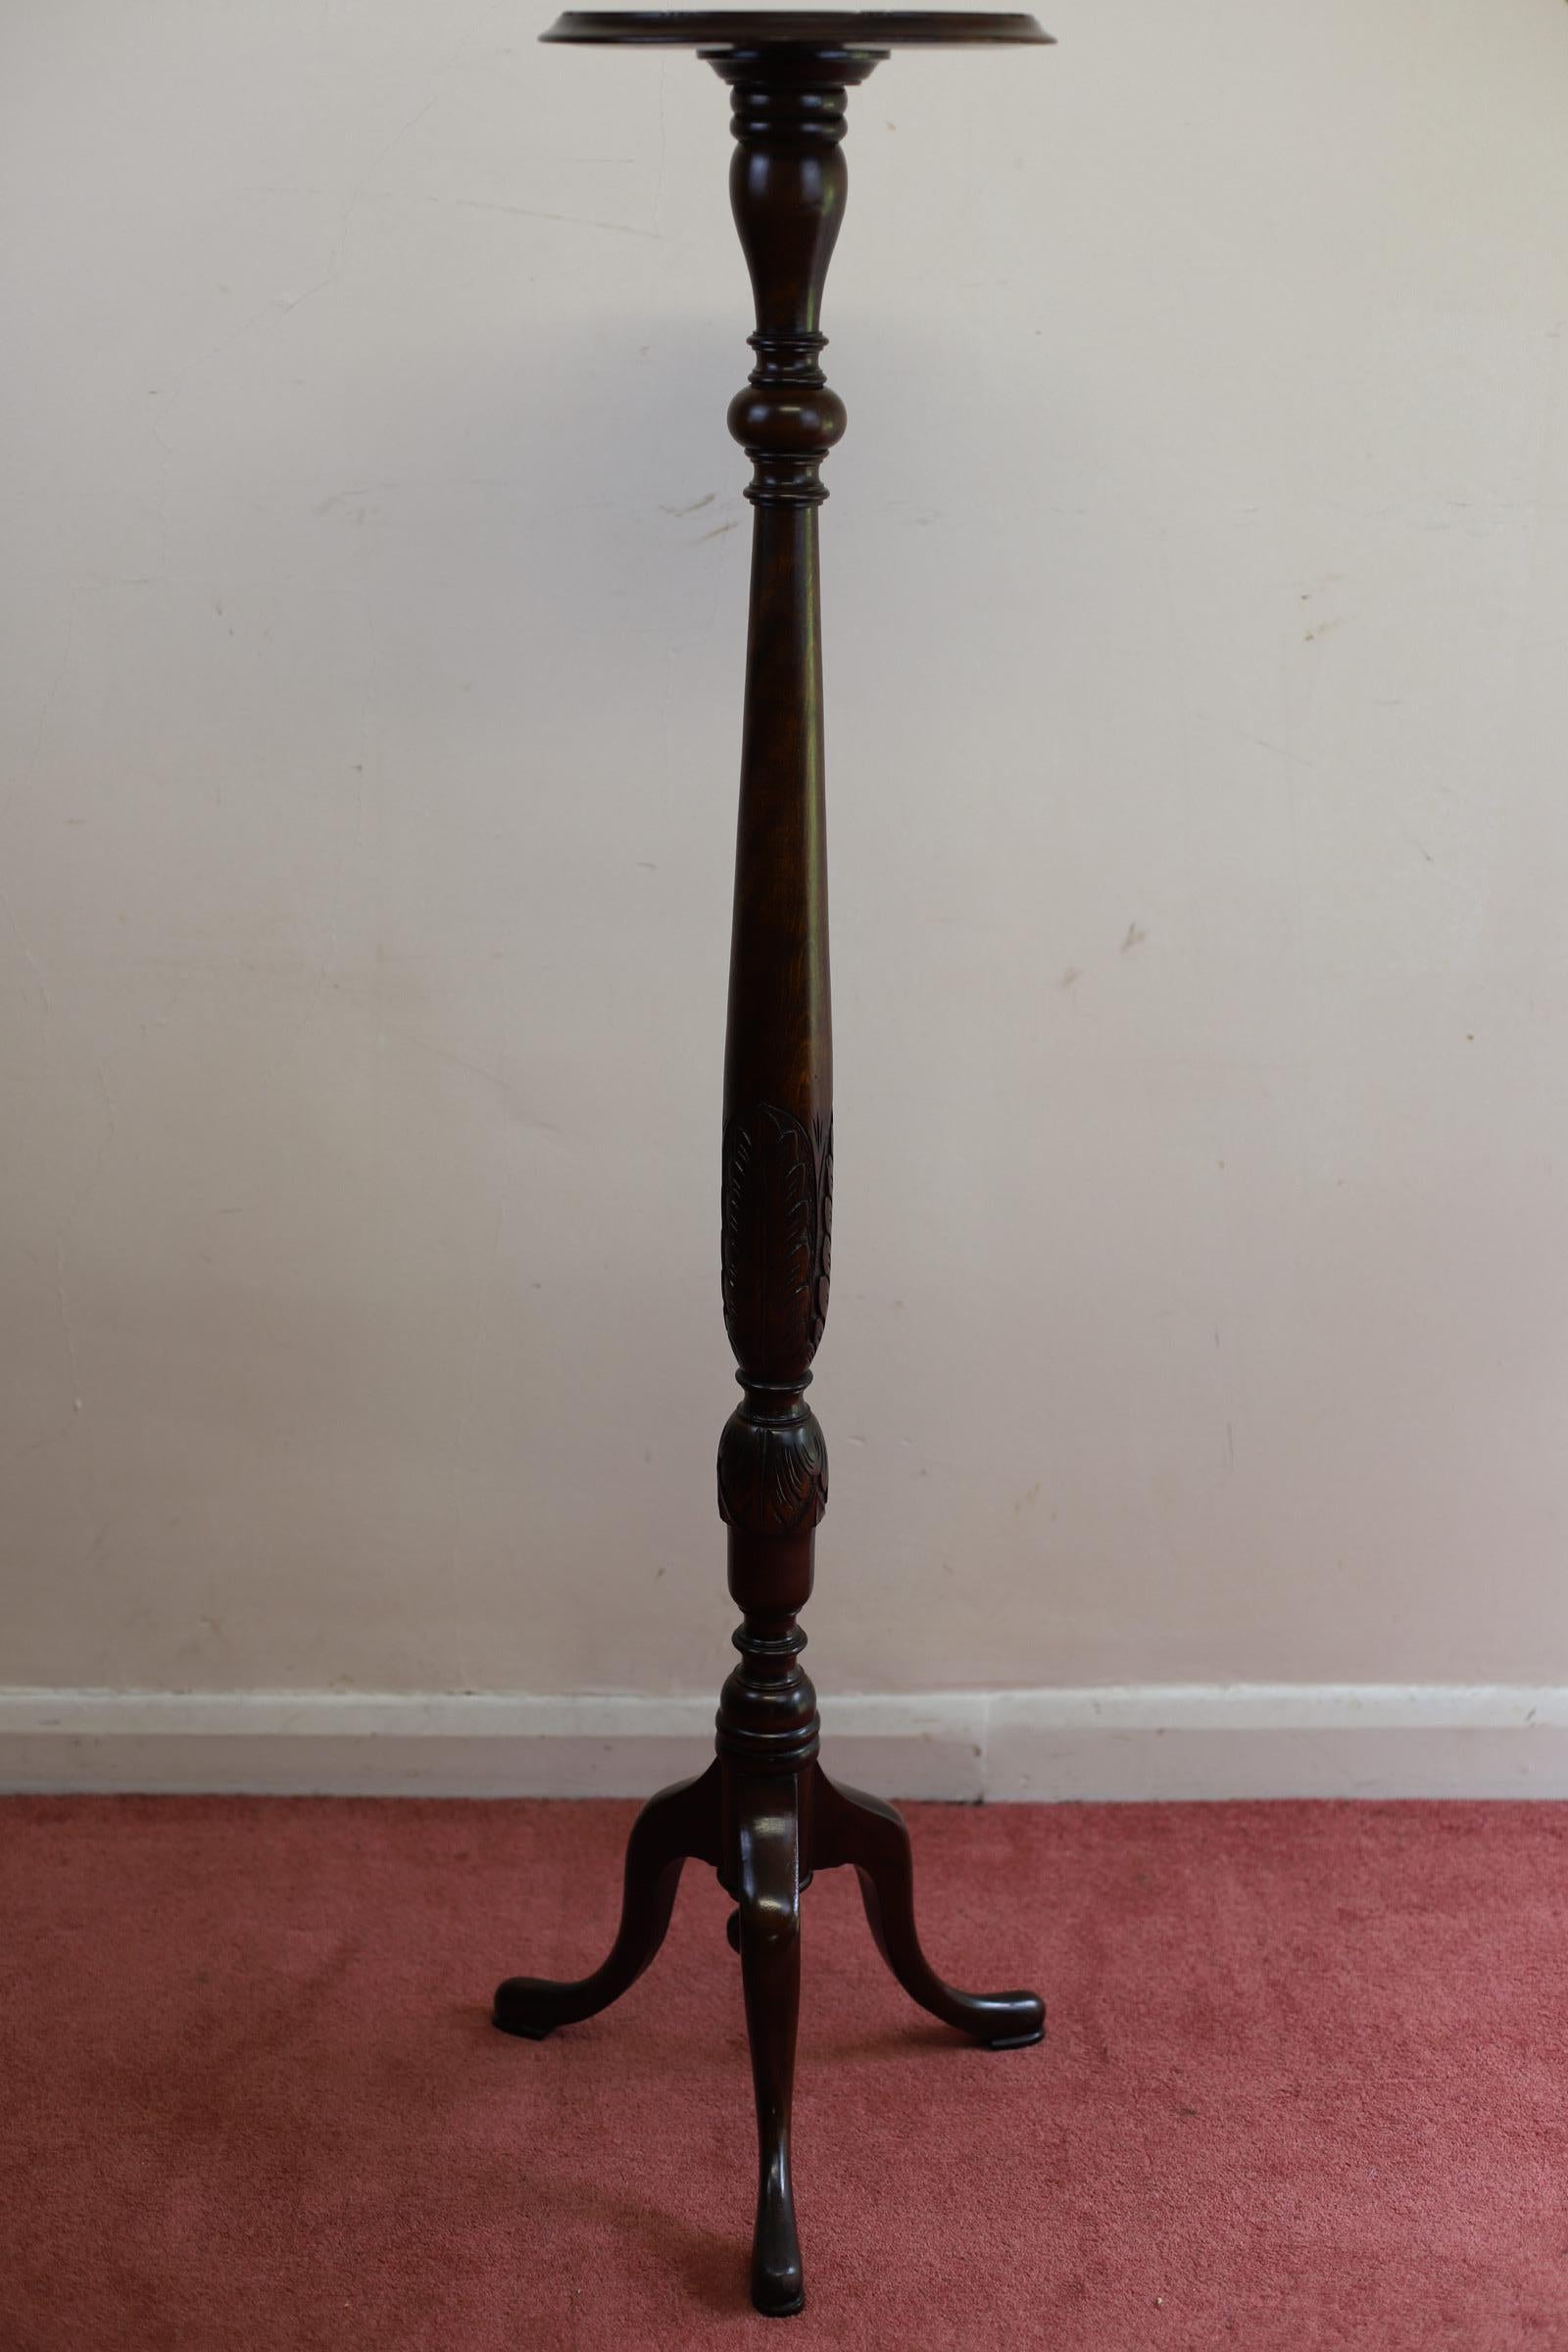 This lovely Victorian mahogany torchiere plant stand is a beautiful addition to any antique furniture collection. The intricate design and high-quality craftsmanship make it a valuable piece to display in your home or office. The stand is perfect